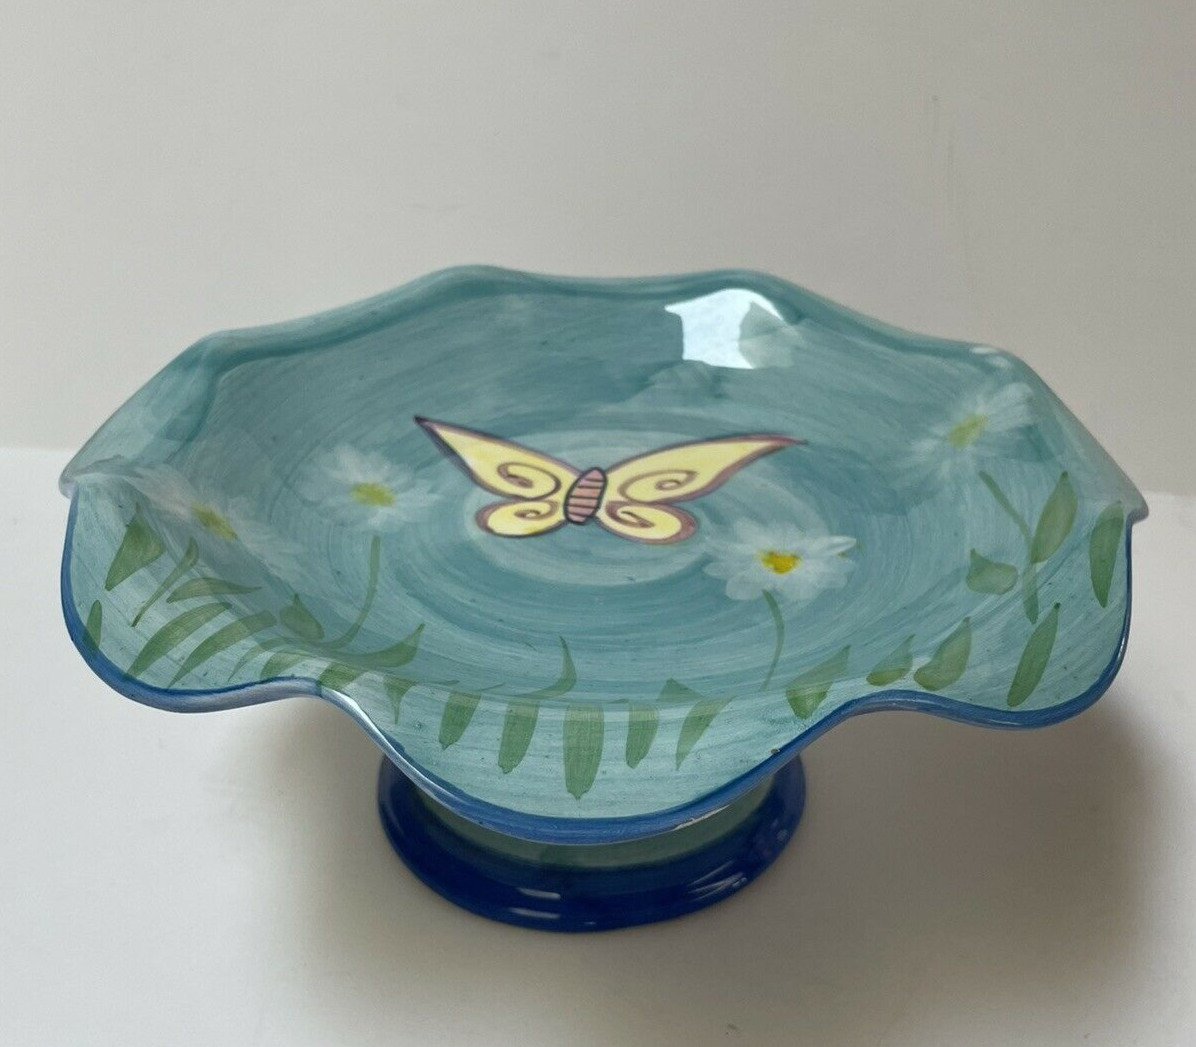 WCL China Butterfly Pedastal Cake Stand Plate Blue Green Yellow 10 inch x 4 in